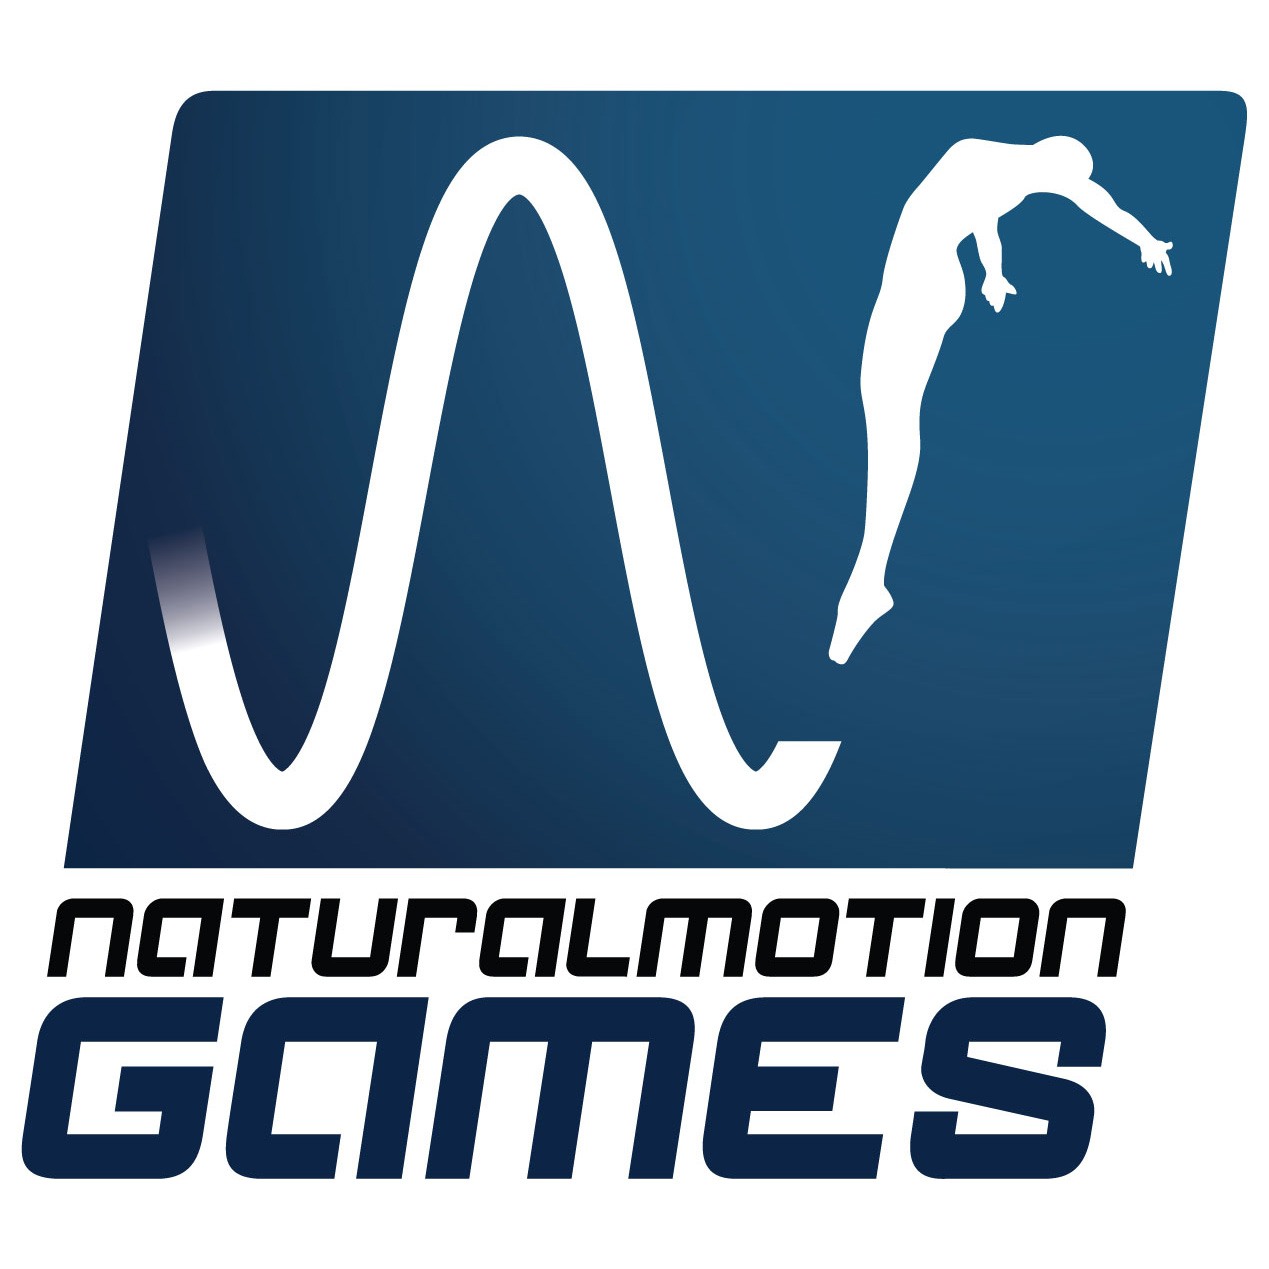 NaturalMotion raises $11 million in funding, sets up office in San Francisco